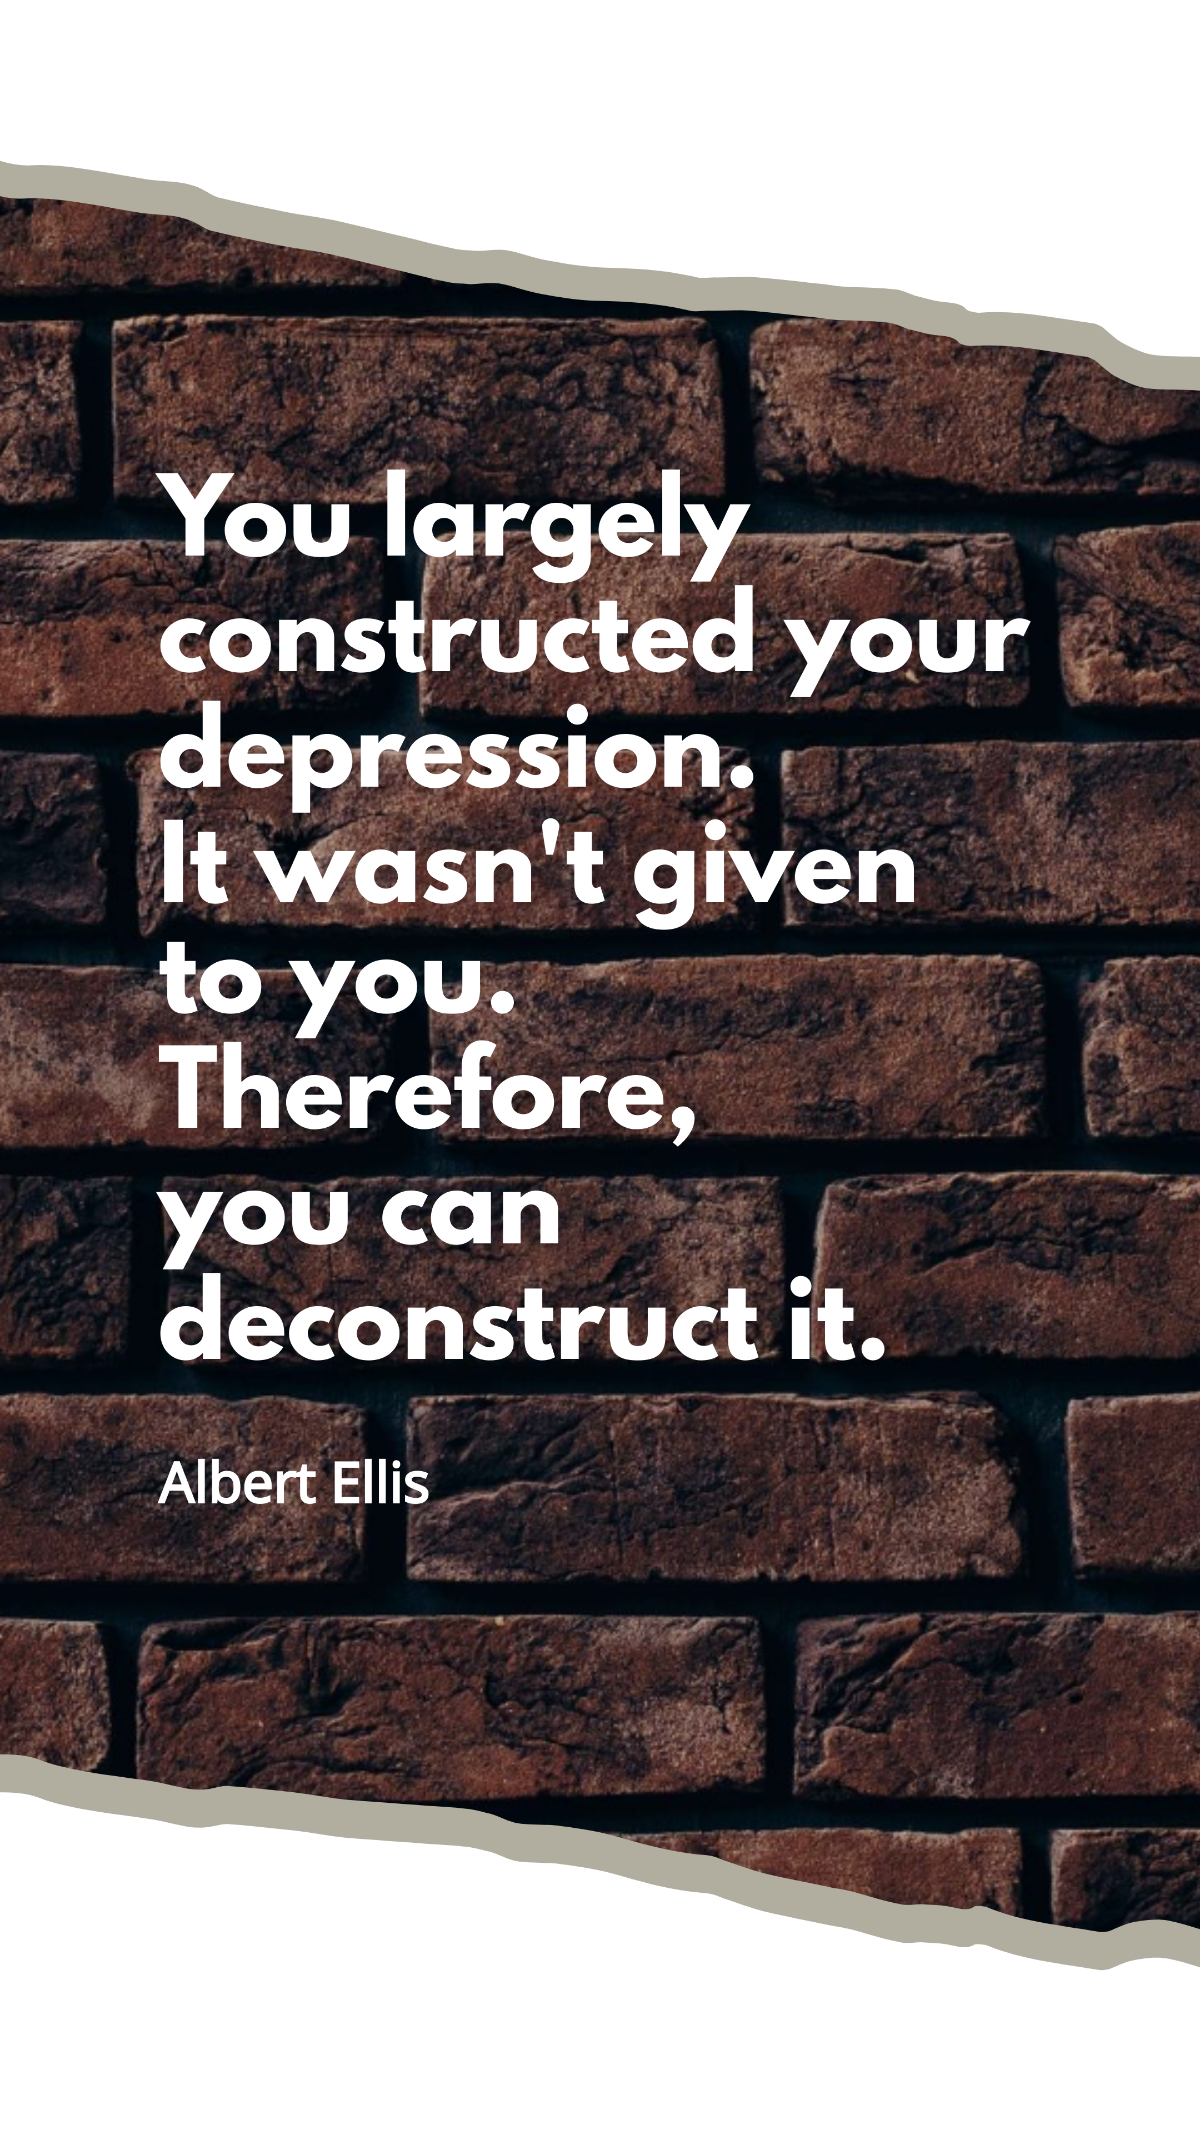 Albert Ellis - You largely constructed your depression. It wasn't given to you. Therefore, you can deconstruct it. Template